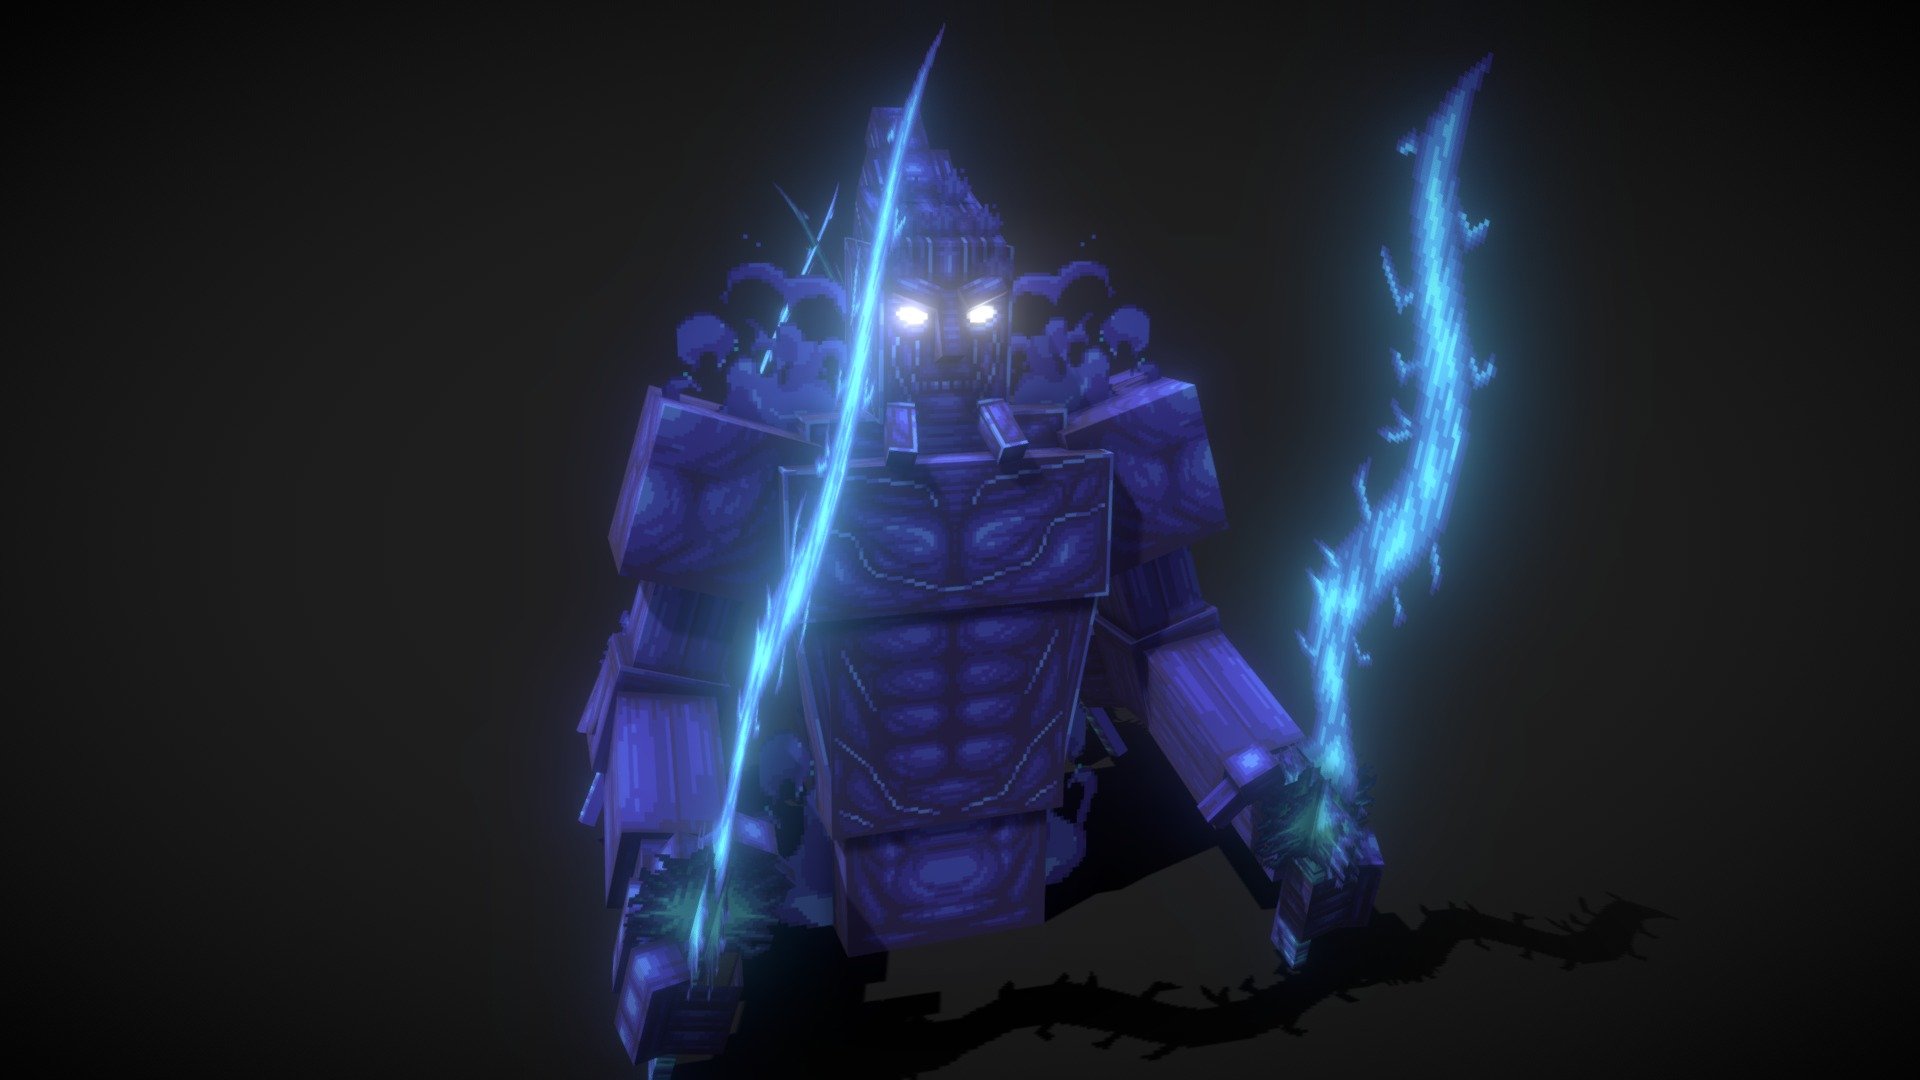 Susanoo for the naruto server im currently helping with. 

Susanoo descended into the land of Izumo in western Japan and killed an eight-headed dragon that had been terrorizing the countryside 3d model